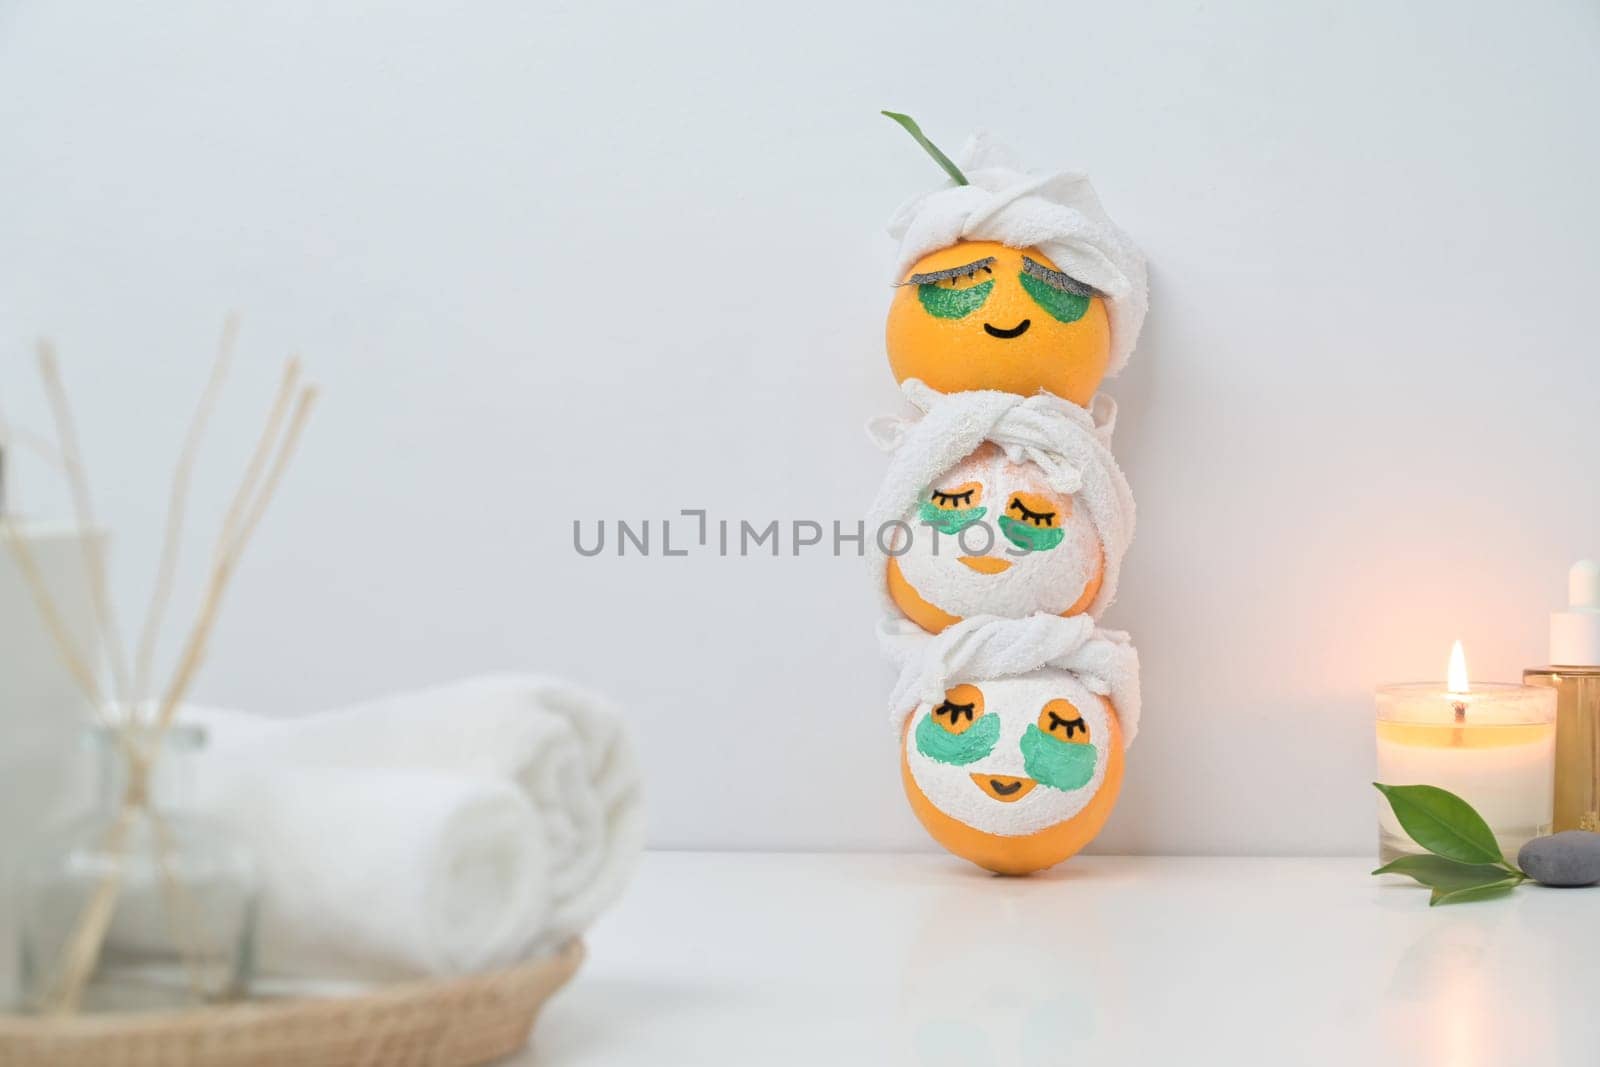 Three orange fruits in face mask near candle on white table. Spa treatment and self care concept by prathanchorruangsak